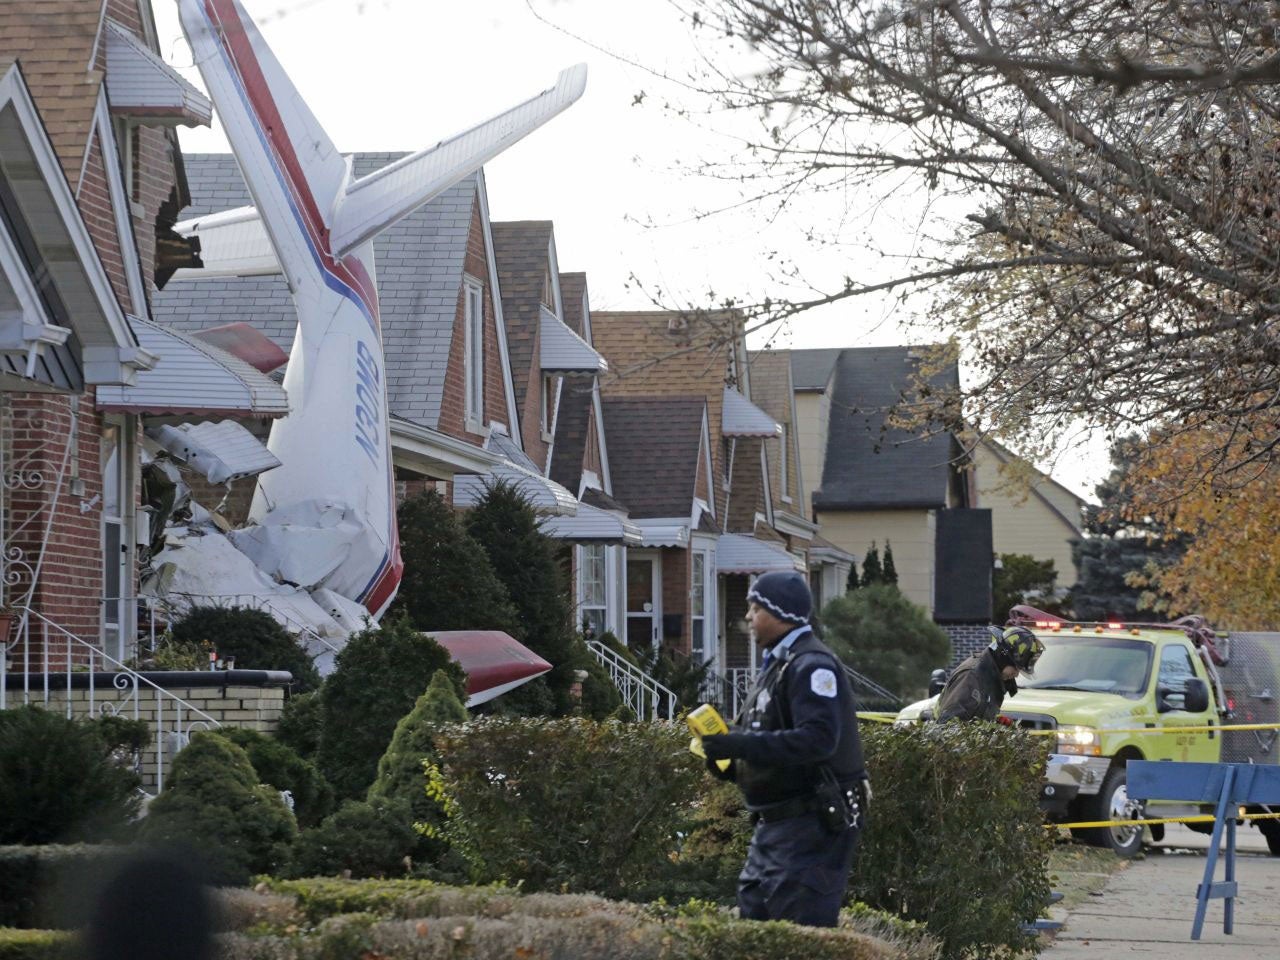 Police and fire officials walk near a small twin-engine cargo plane that crashed into a home on Chicago's southwest side